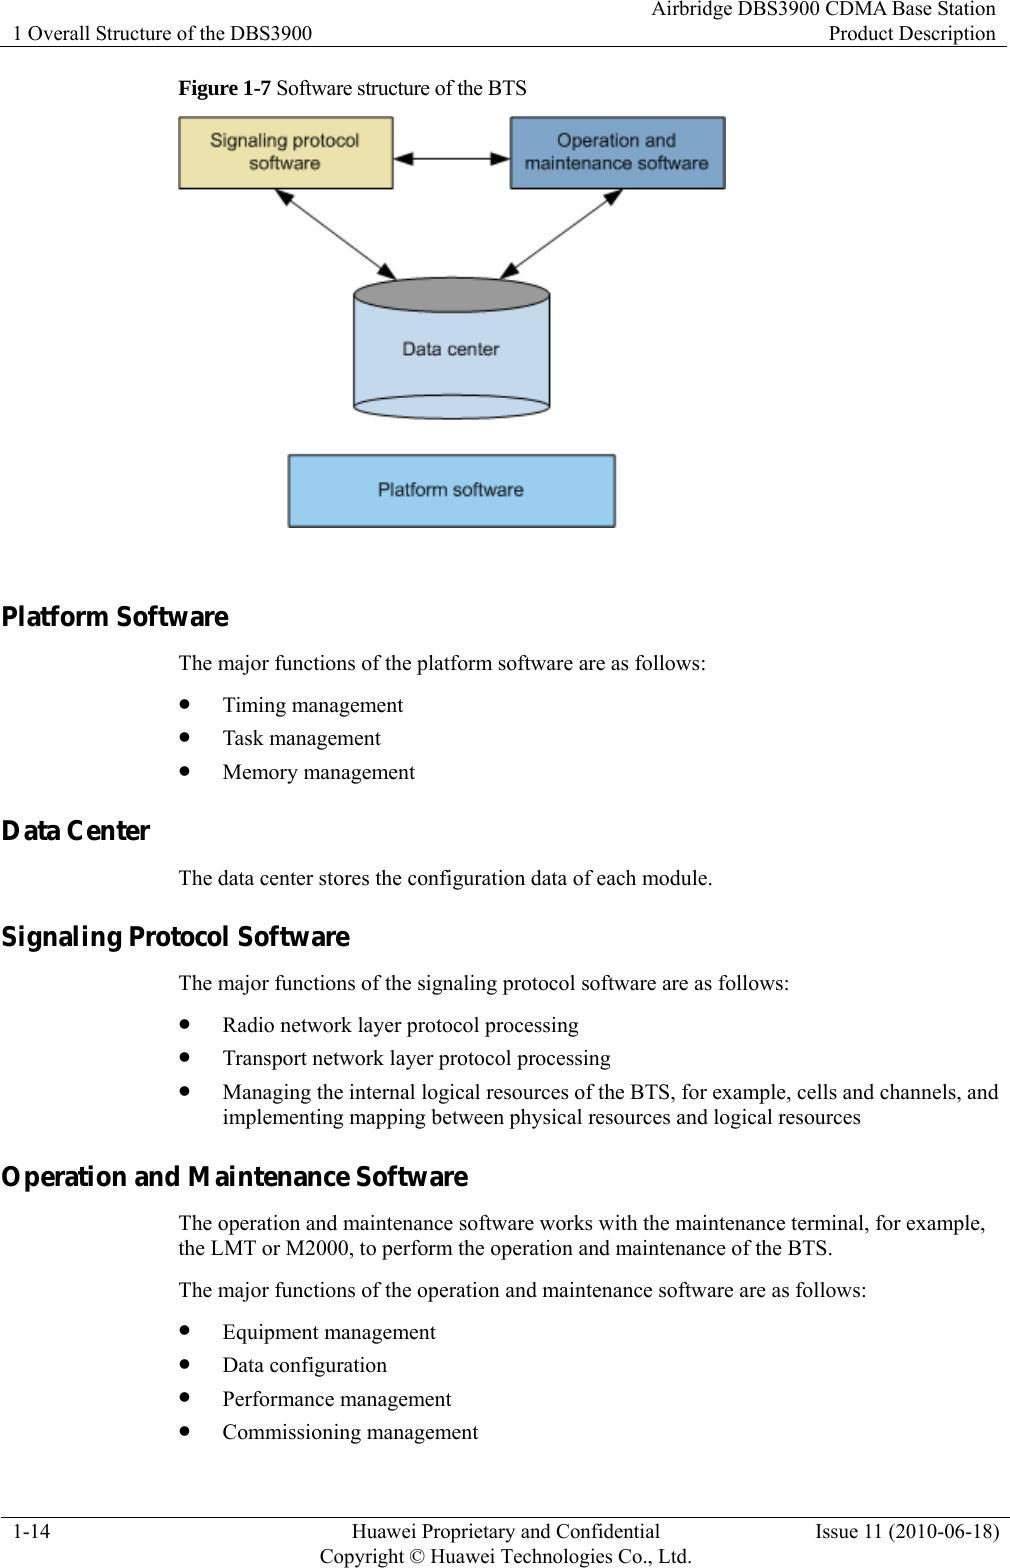 1 Overall Structure of the DBS3900 Airbridge DBS3900 CDMA Base StationProduct Description 1-14  Huawei Proprietary and Confidential     Copyright © Huawei Technologies Co., Ltd.Issue 11 (2010-06-18) Figure 1-7 Software structure of the BTS   Platform Software The major functions of the platform software are as follows: z Timing management z Task management z Memory management Data Center The data center stores the configuration data of each module. Signaling Protocol Software The major functions of the signaling protocol software are as follows: z Radio network layer protocol processing z Transport network layer protocol processing z Managing the internal logical resources of the BTS, for example, cells and channels, and implementing mapping between physical resources and logical resources Operation and Maintenance Software The operation and maintenance software works with the maintenance terminal, for example, the LMT or M2000, to perform the operation and maintenance of the BTS. The major functions of the operation and maintenance software are as follows: z Equipment management z Data configuration z Performance management z Commissioning management 